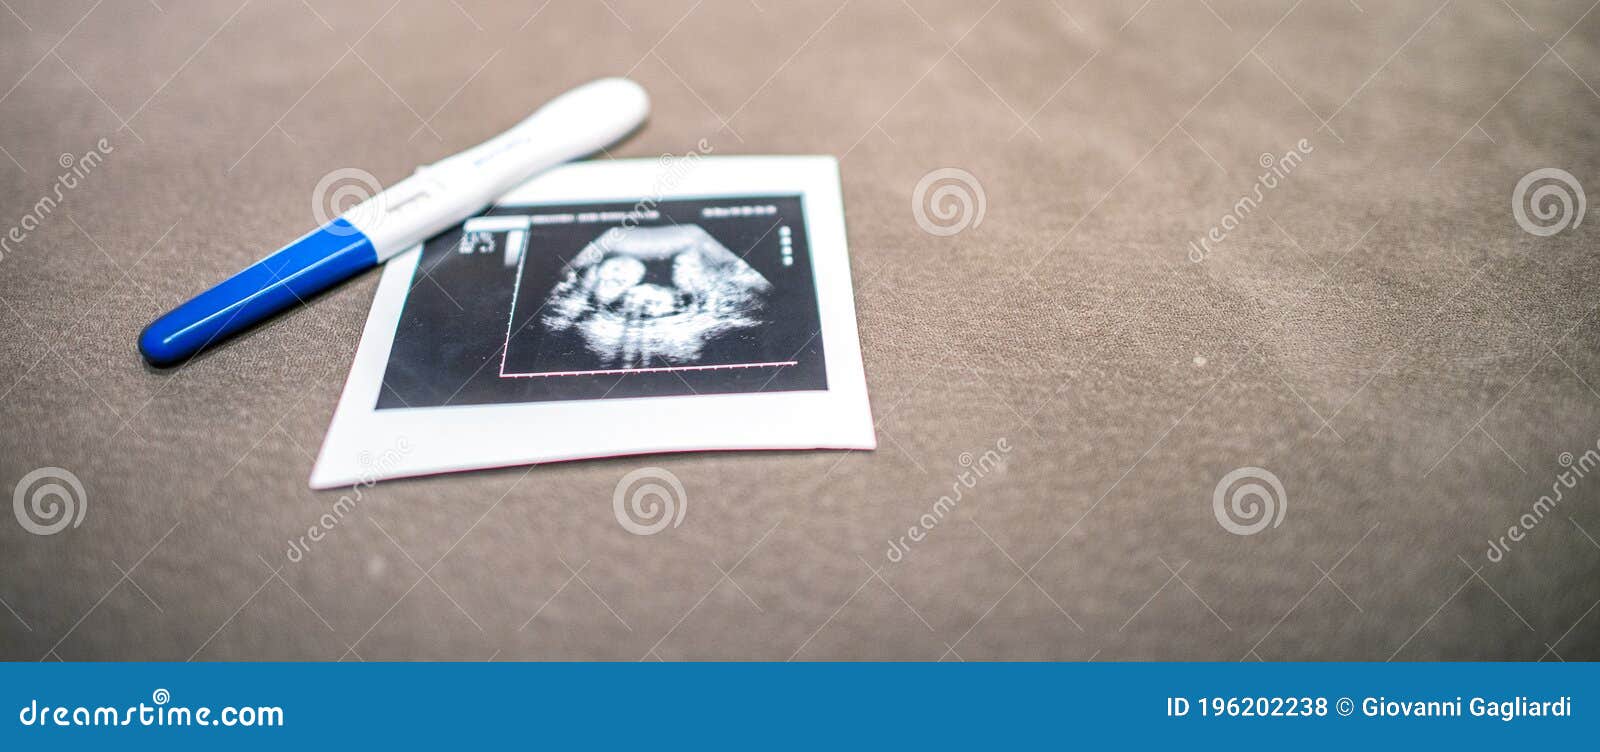 Pregnancy Test Stick And Fetus Ultrasound On The Table Stock Photo